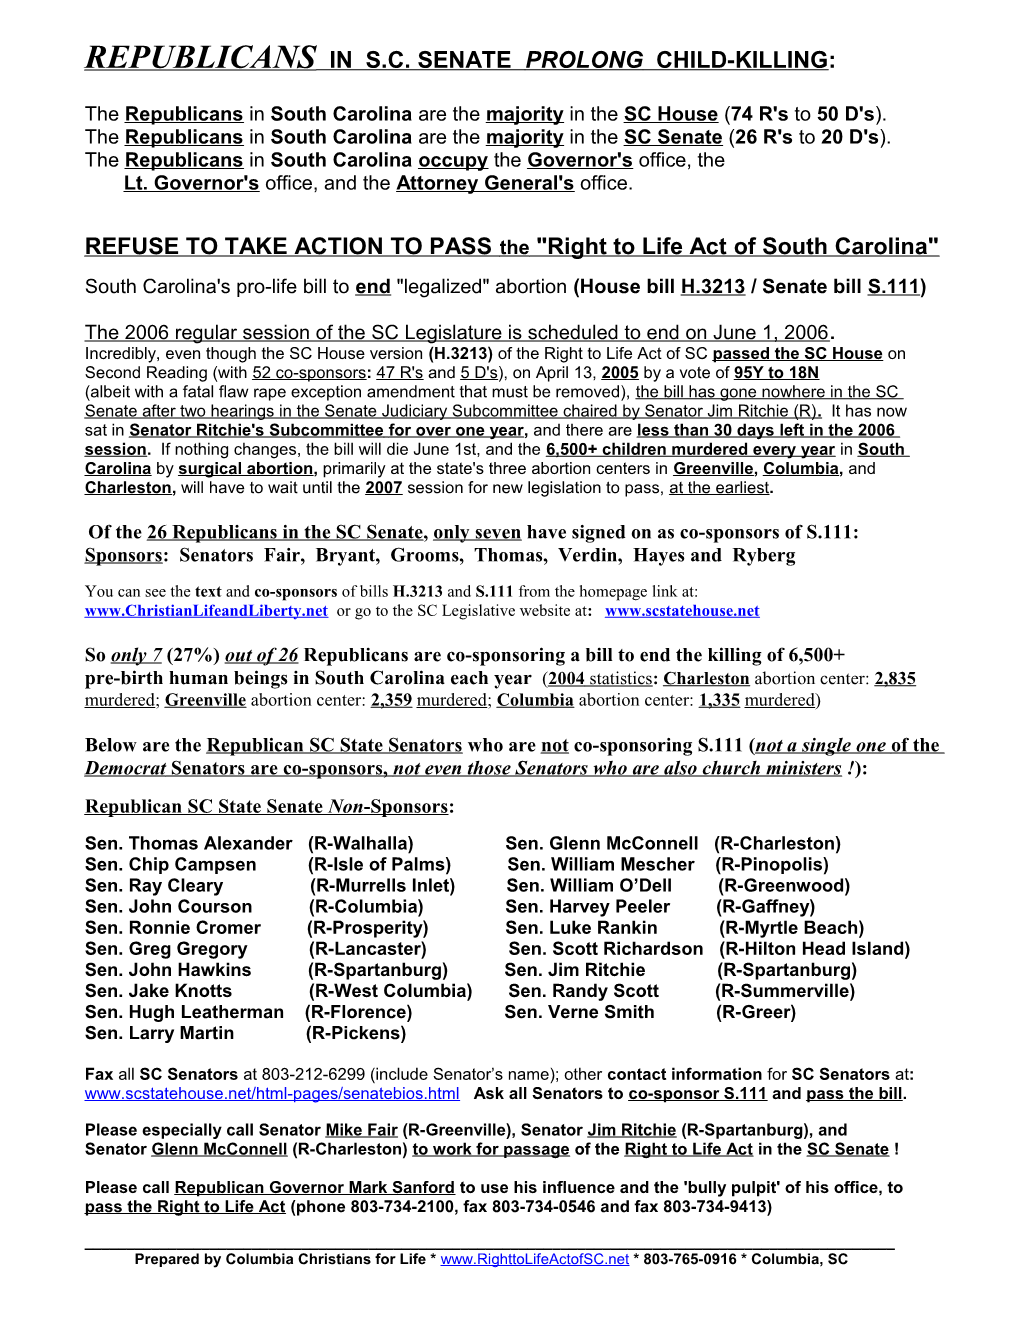 UPDATE on Right to Life Act of South Carolina (H